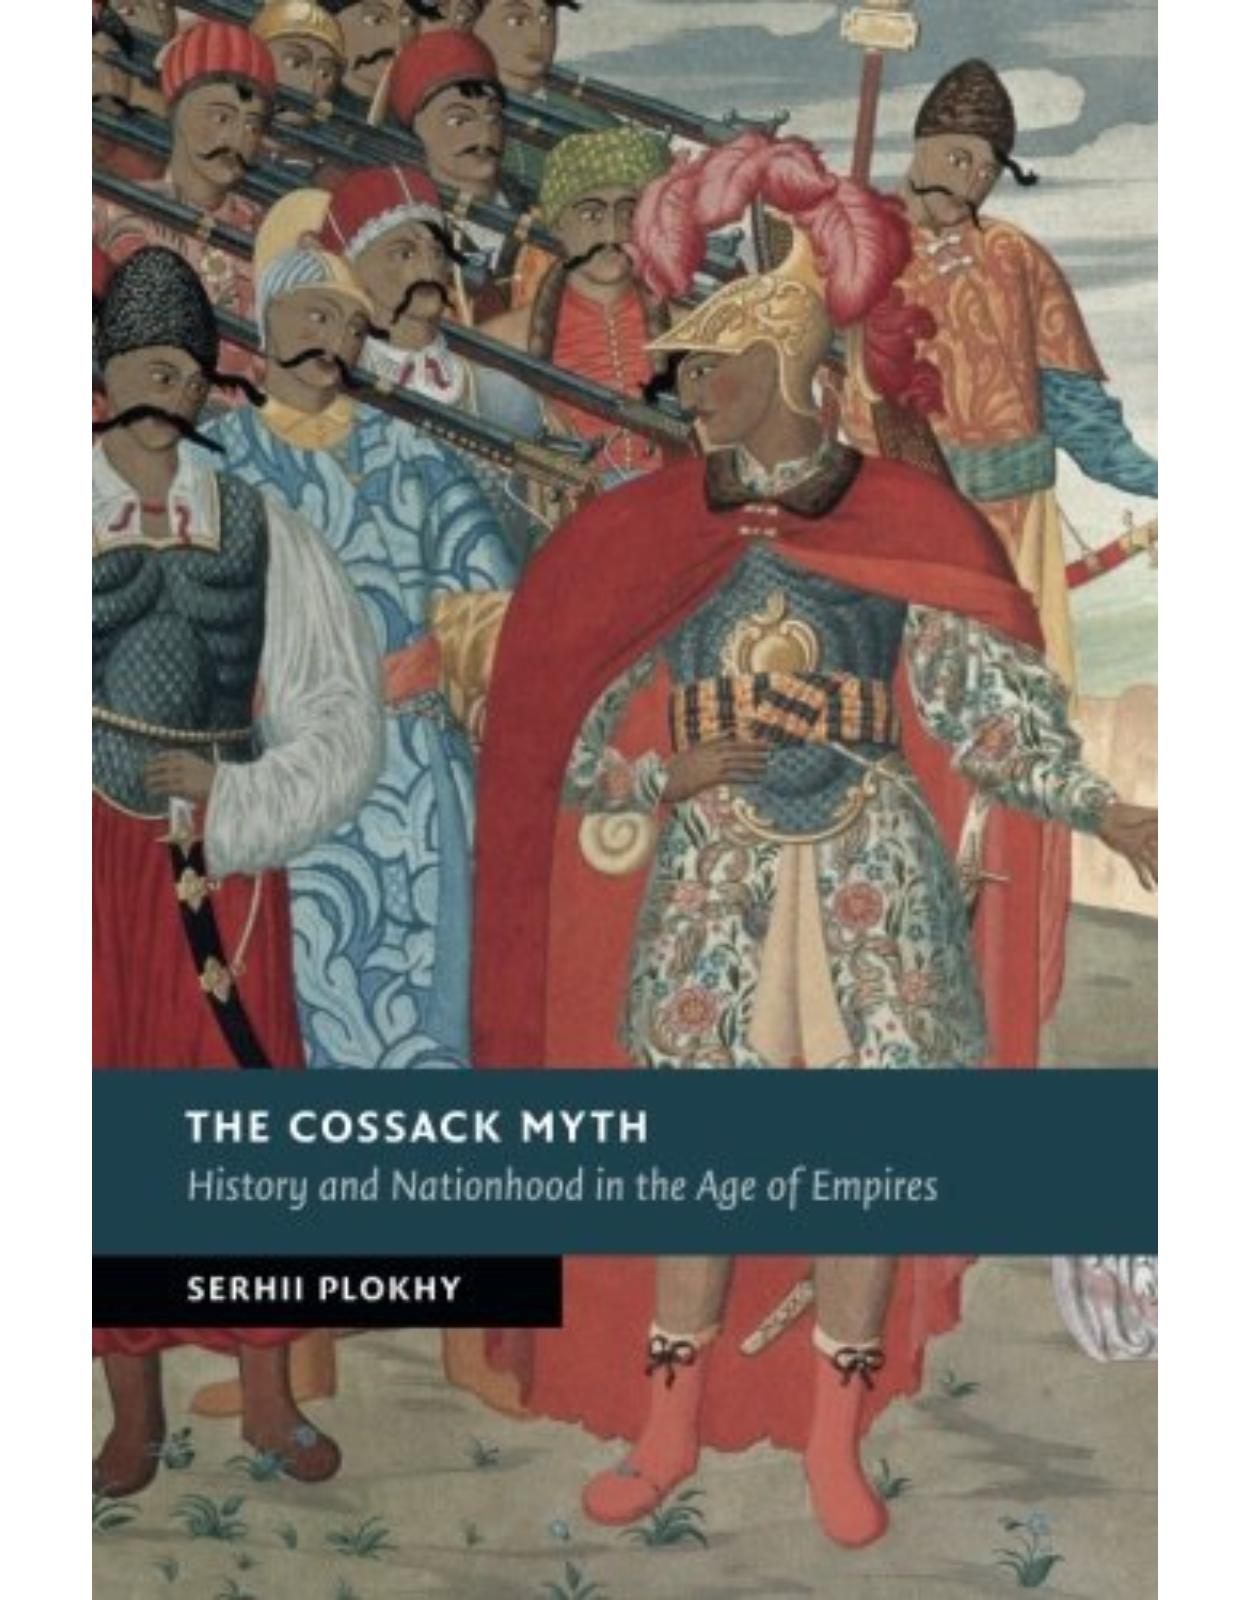 The Cossack Myth: History and Nationhood in the Age of Empires (New Studies in European History)